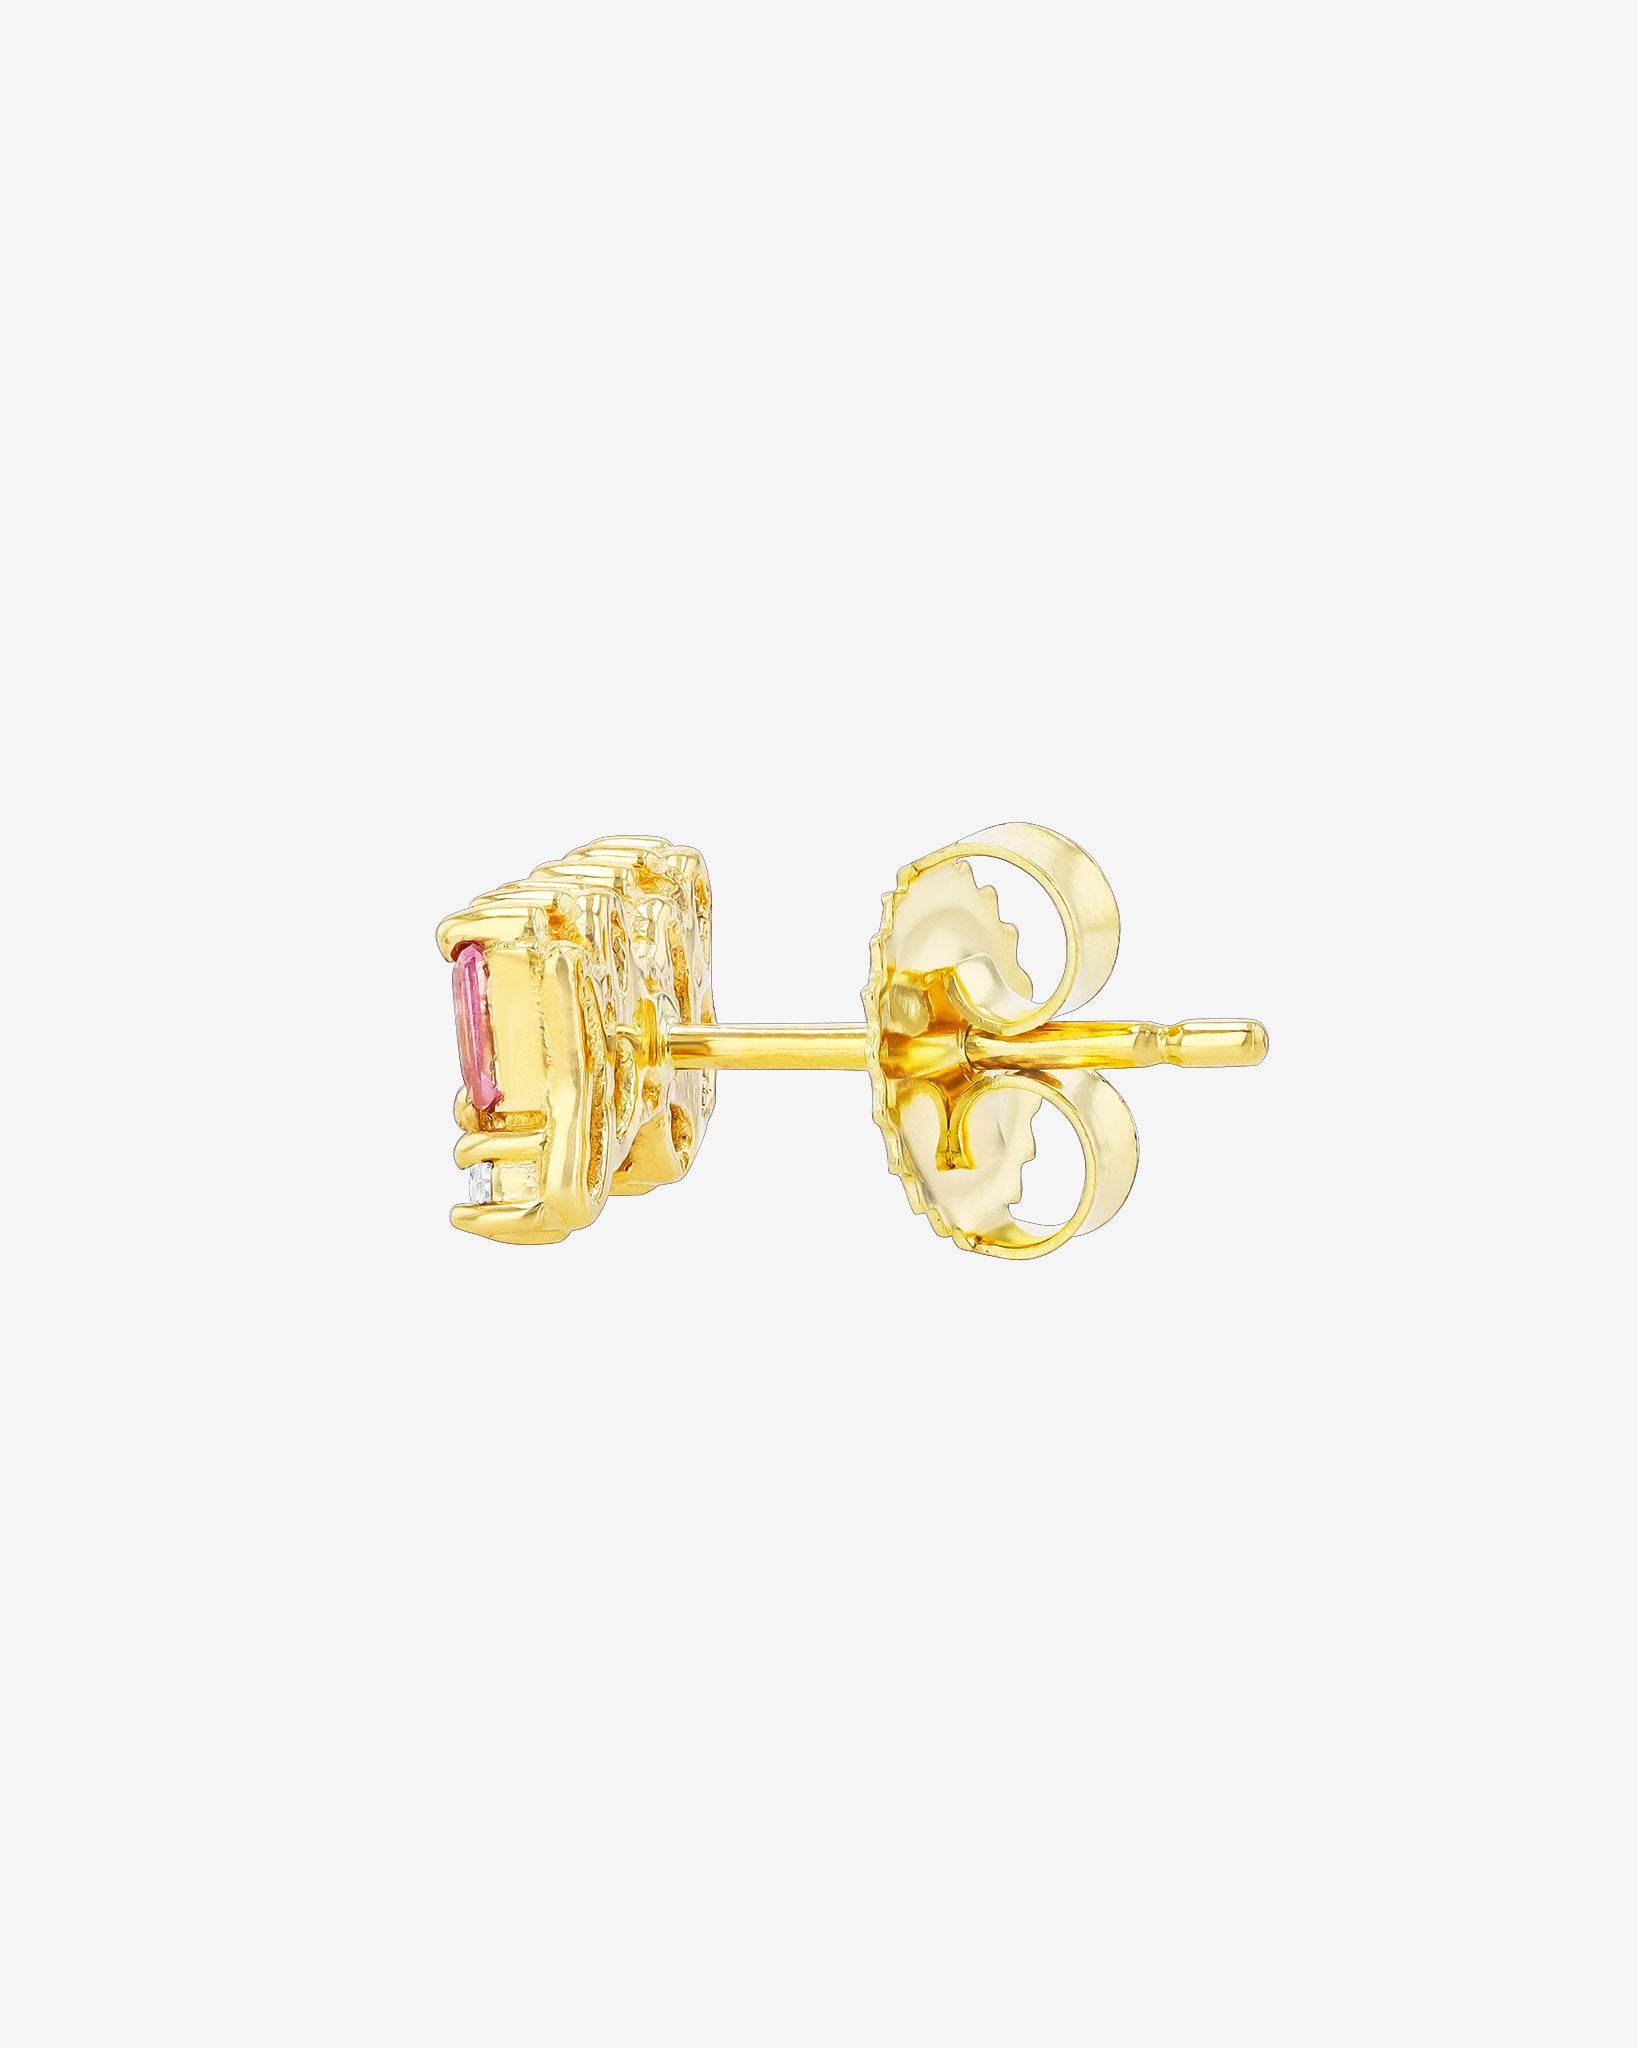 Suzanne Kalan Shimmer Pastel Sapphire Studs in 18k yellow gold